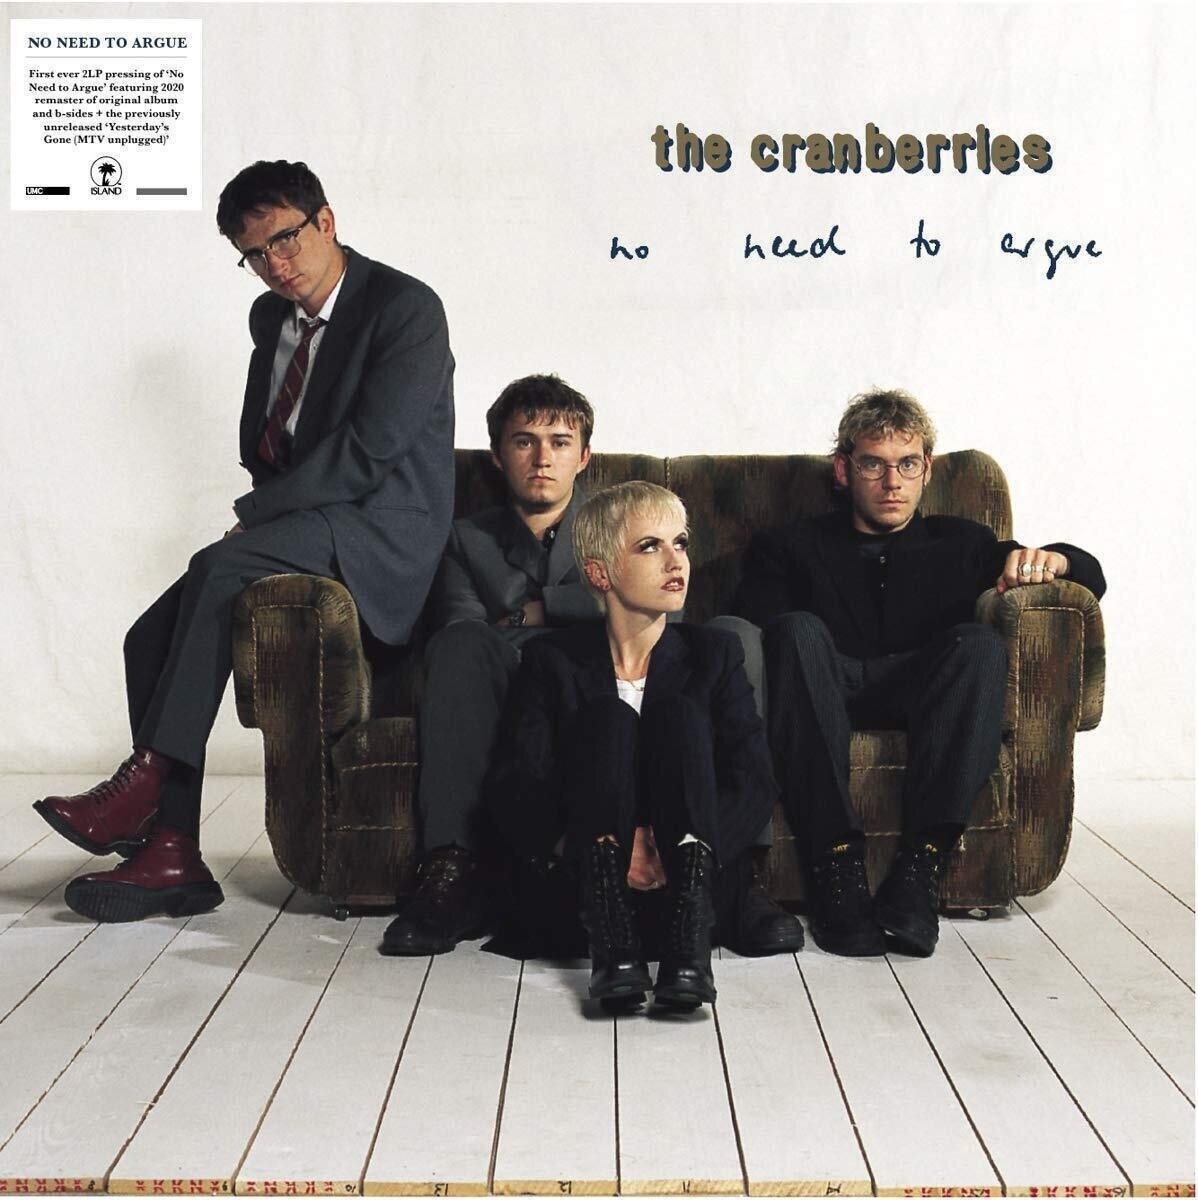 The Cranberries - No Need To Argue (Deluxe Edition) (2 LP)